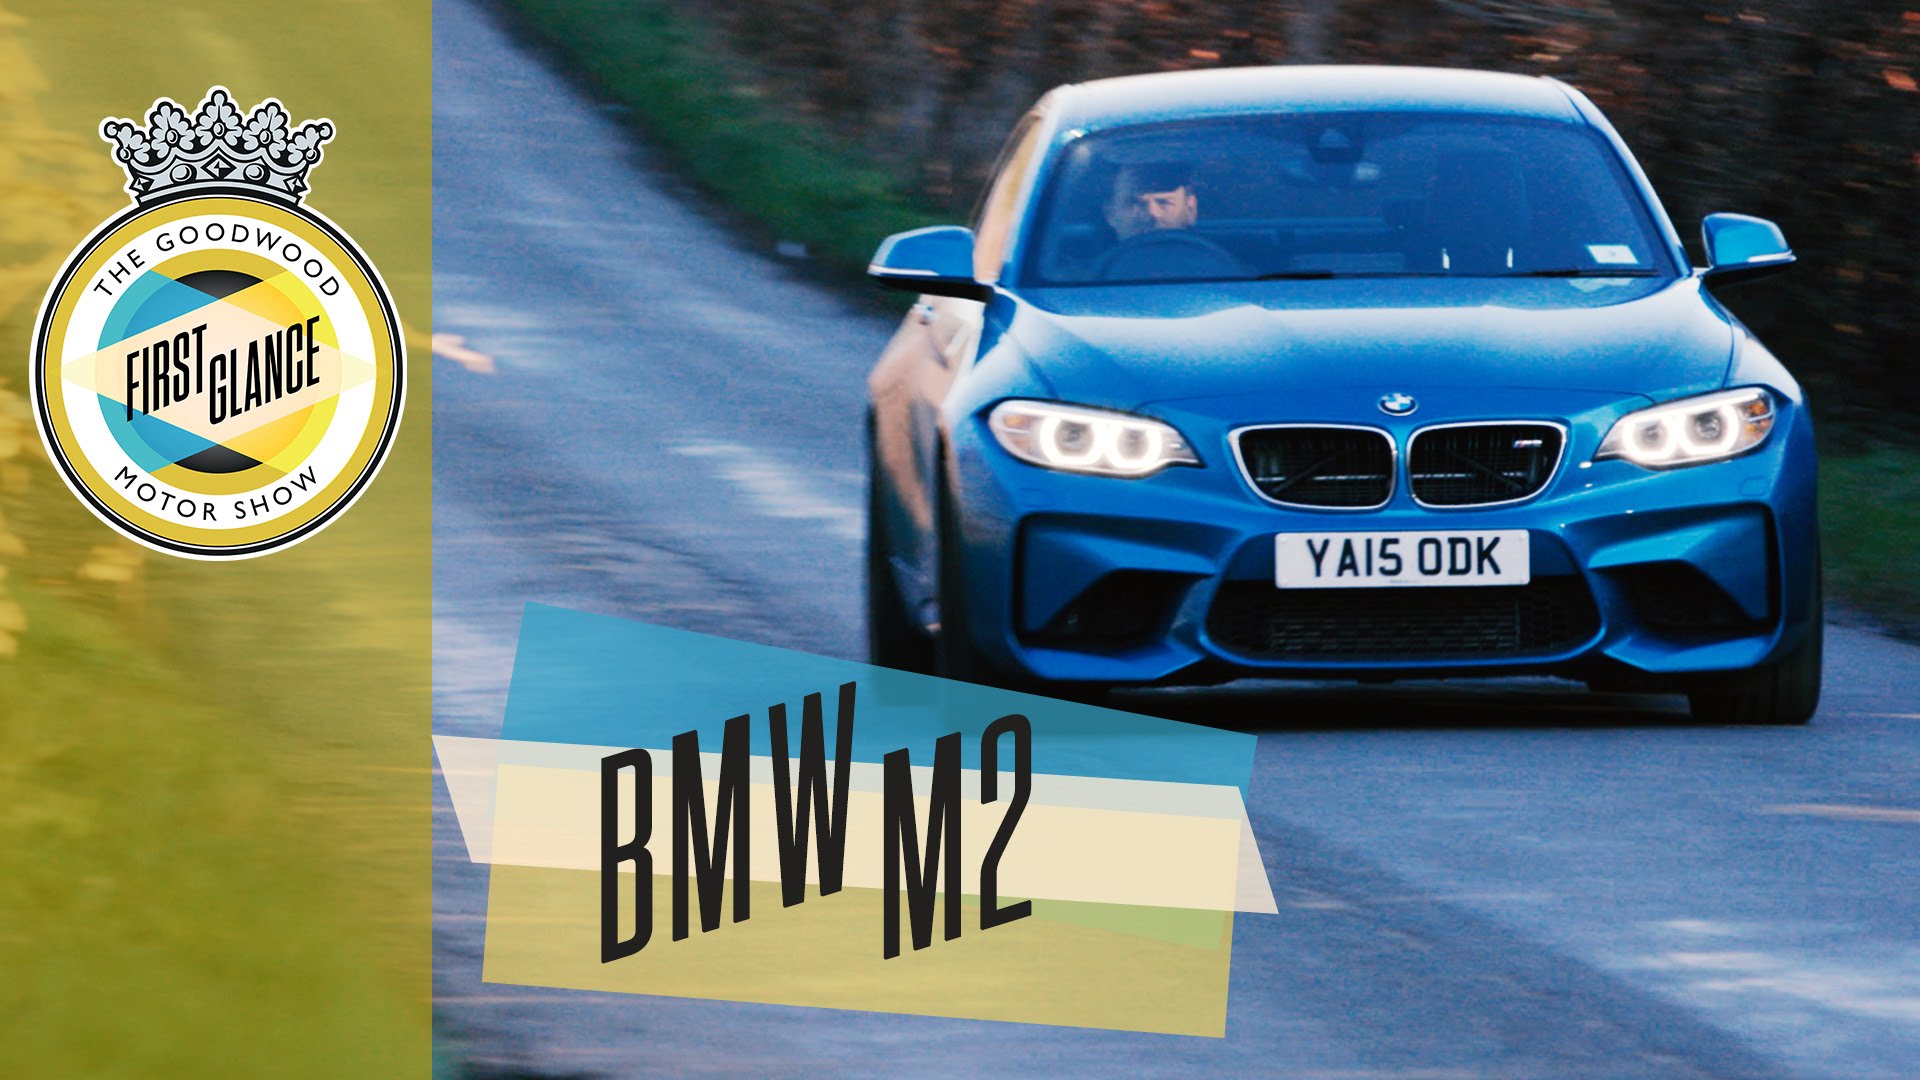 Former Stig Tests and Reviews the BMW M2 Coupe - BMW.SG